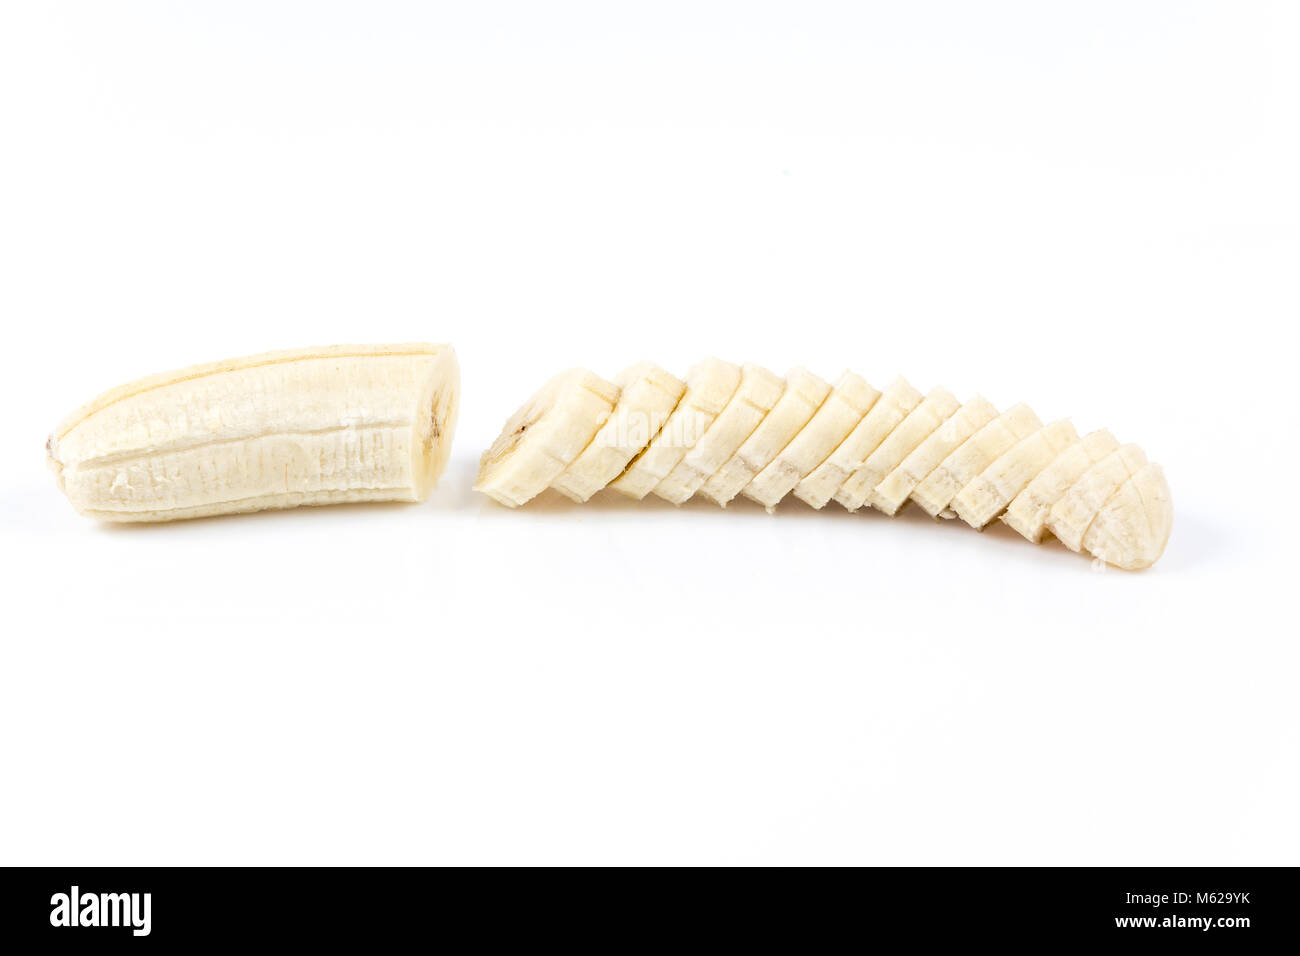 cuts-of-banana-without-peel-isolated-on-white-background-M629YK.jpg